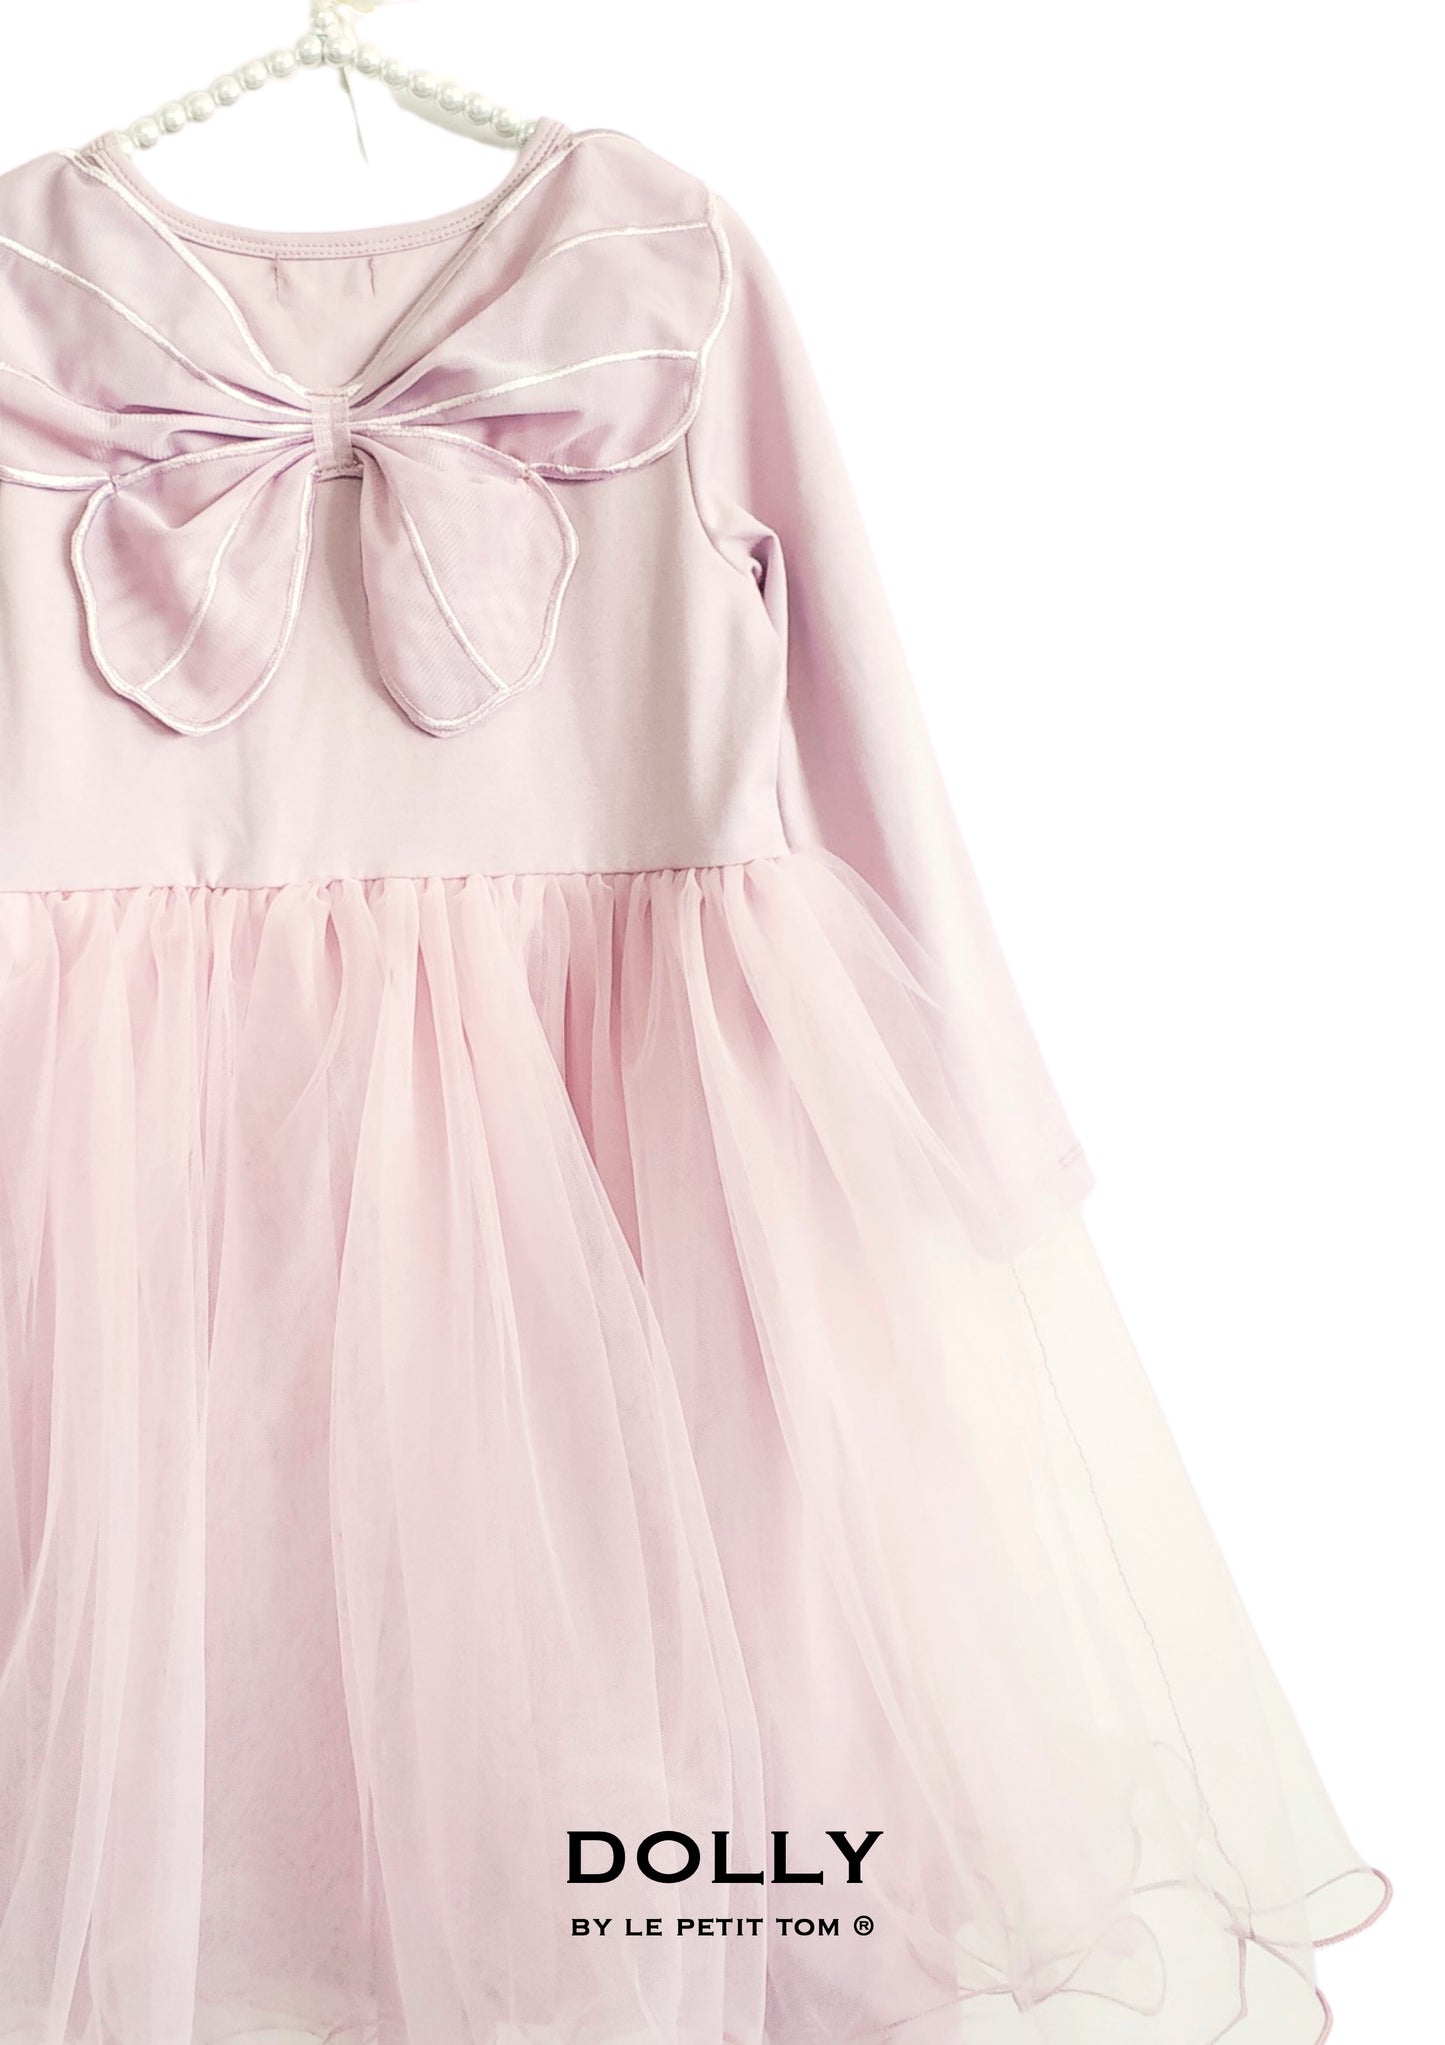 DOLLY by Le Petit Tom ® BUTTERFLY WINGS TUTU DRESS pink